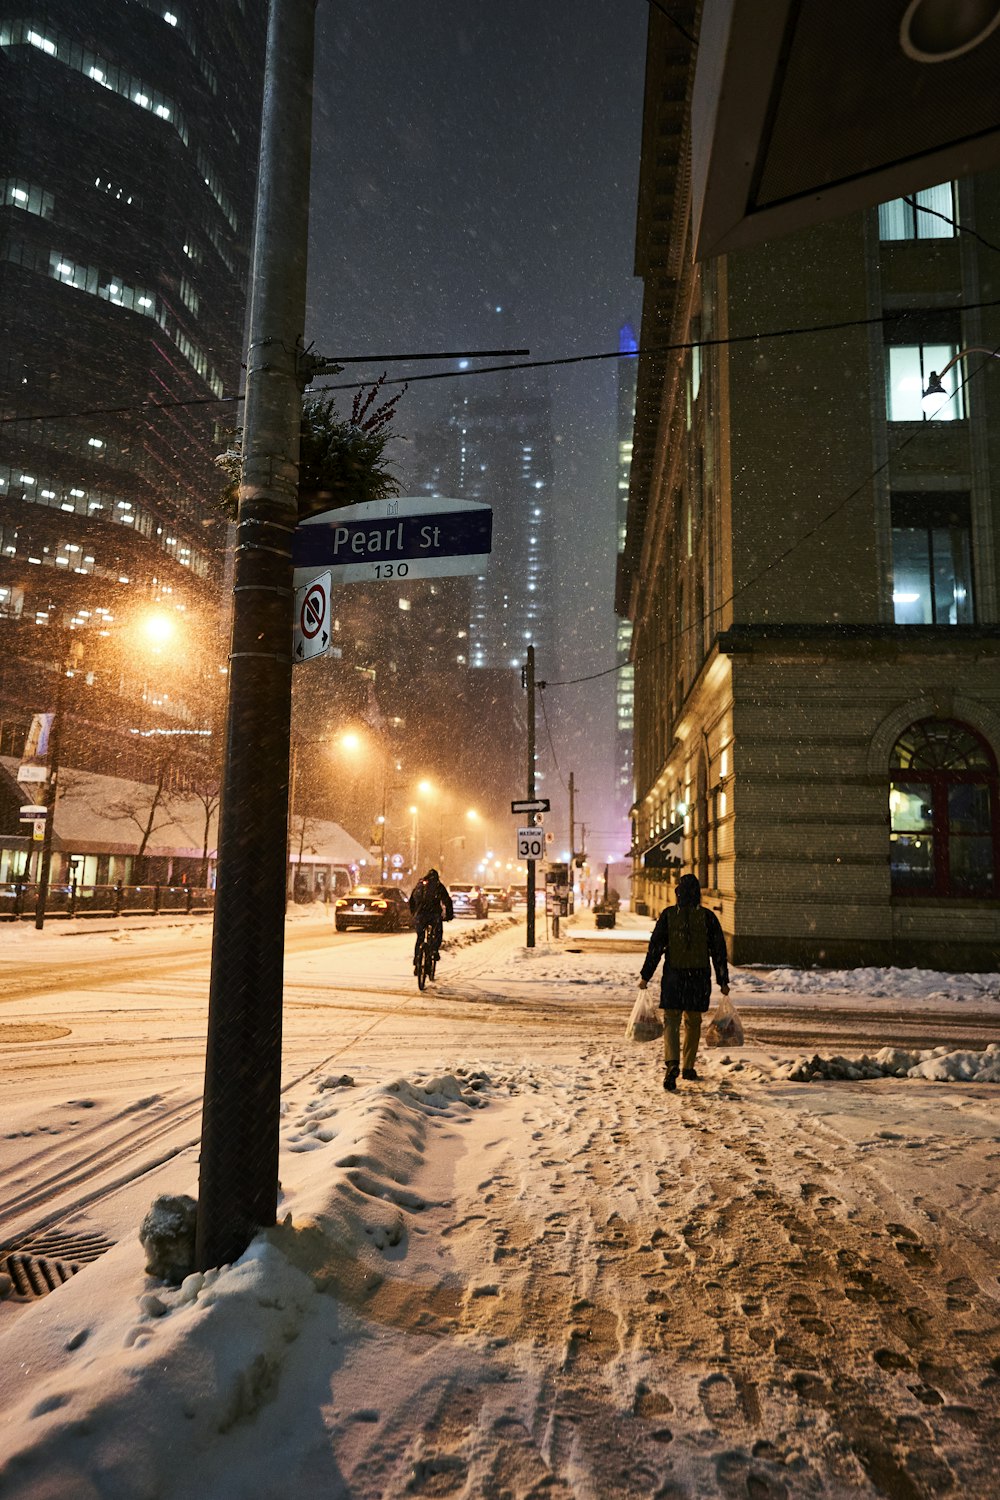 a person walking down a snowy street at night